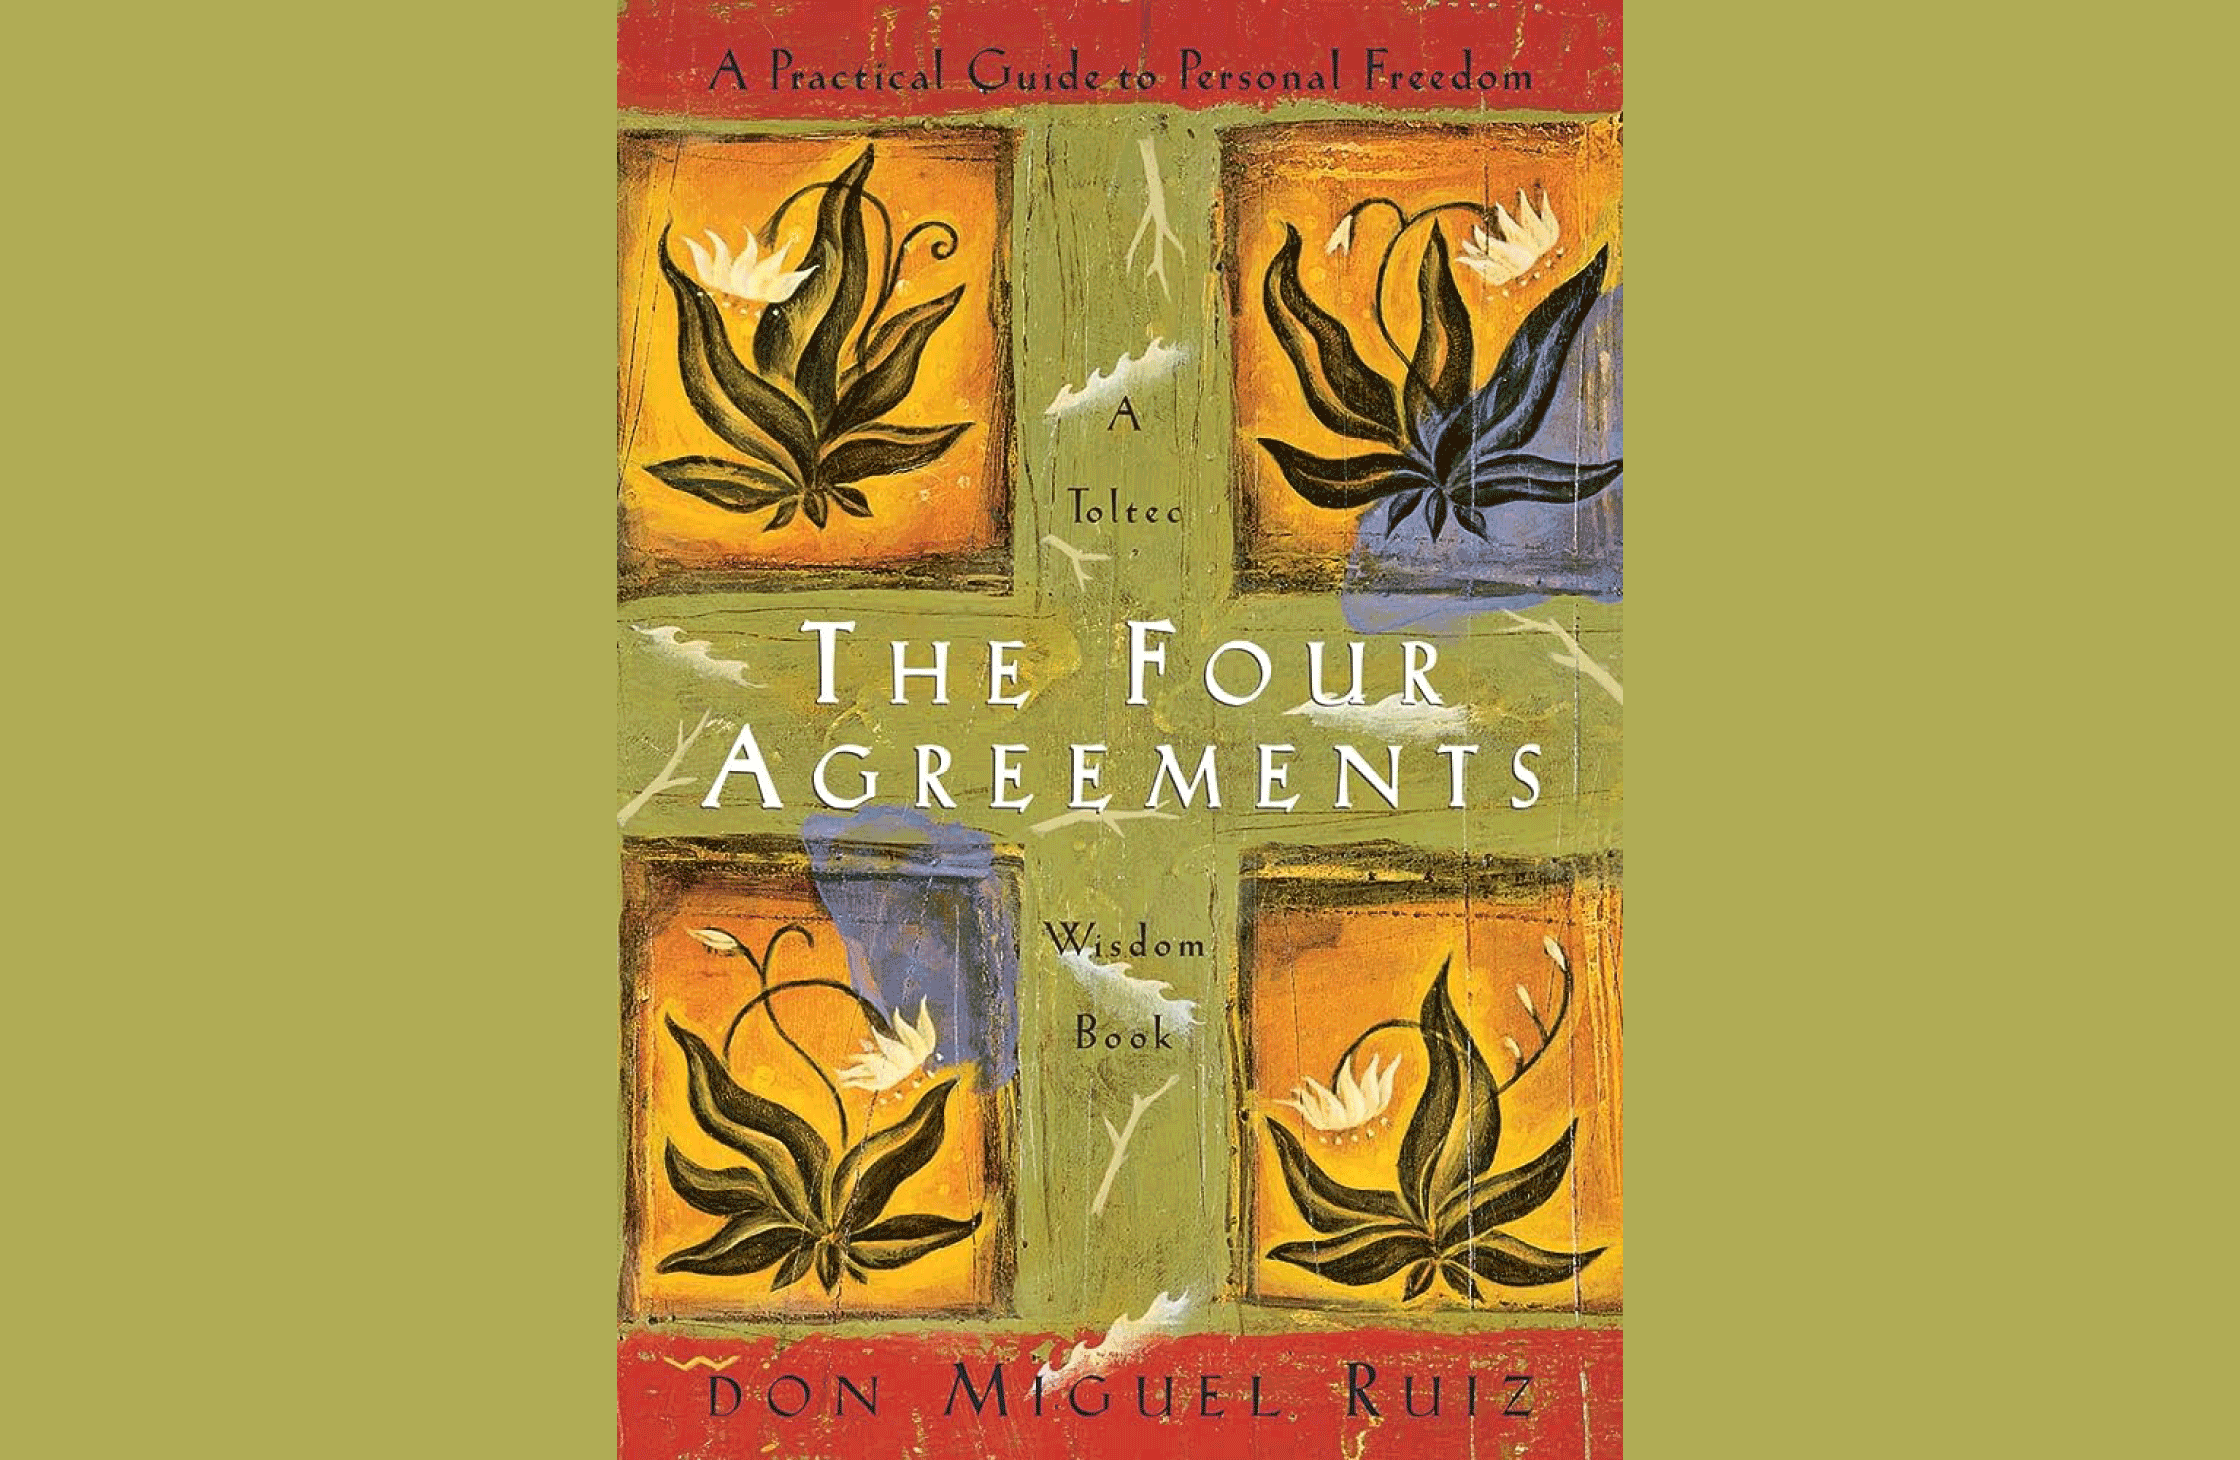 Transform Your Life with "The Four Agreements" by Don Miguel Ruiz